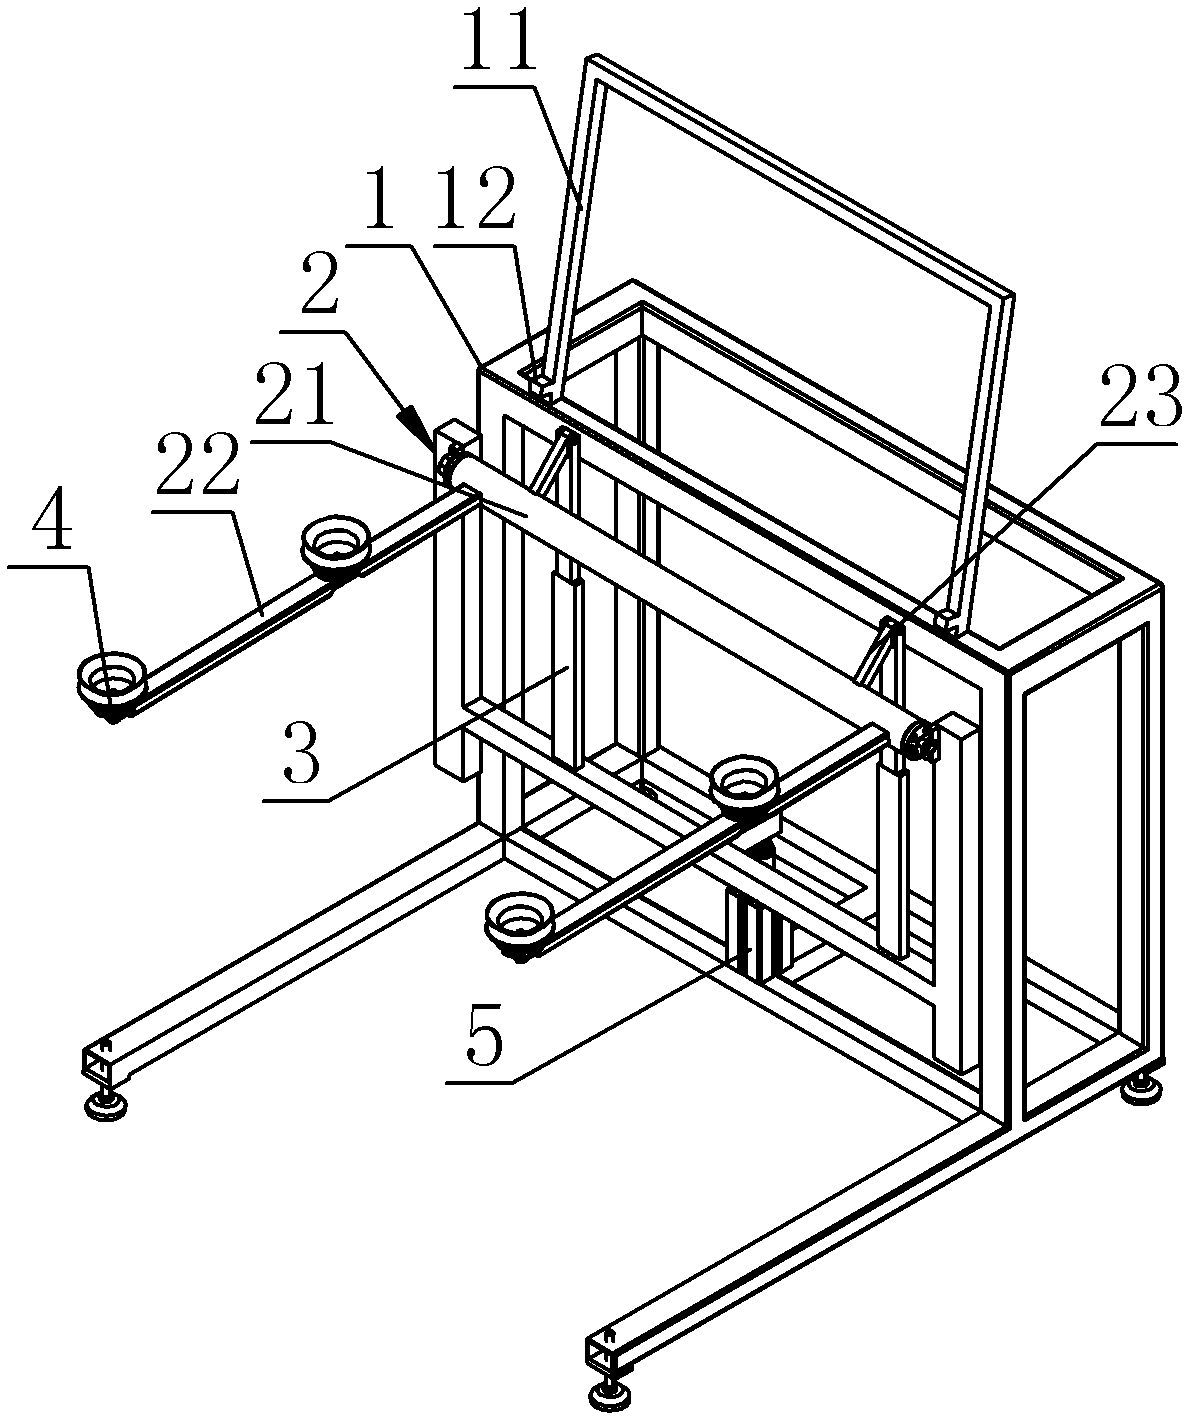 On-line appearance detecting machine after lamination of solar cell panels